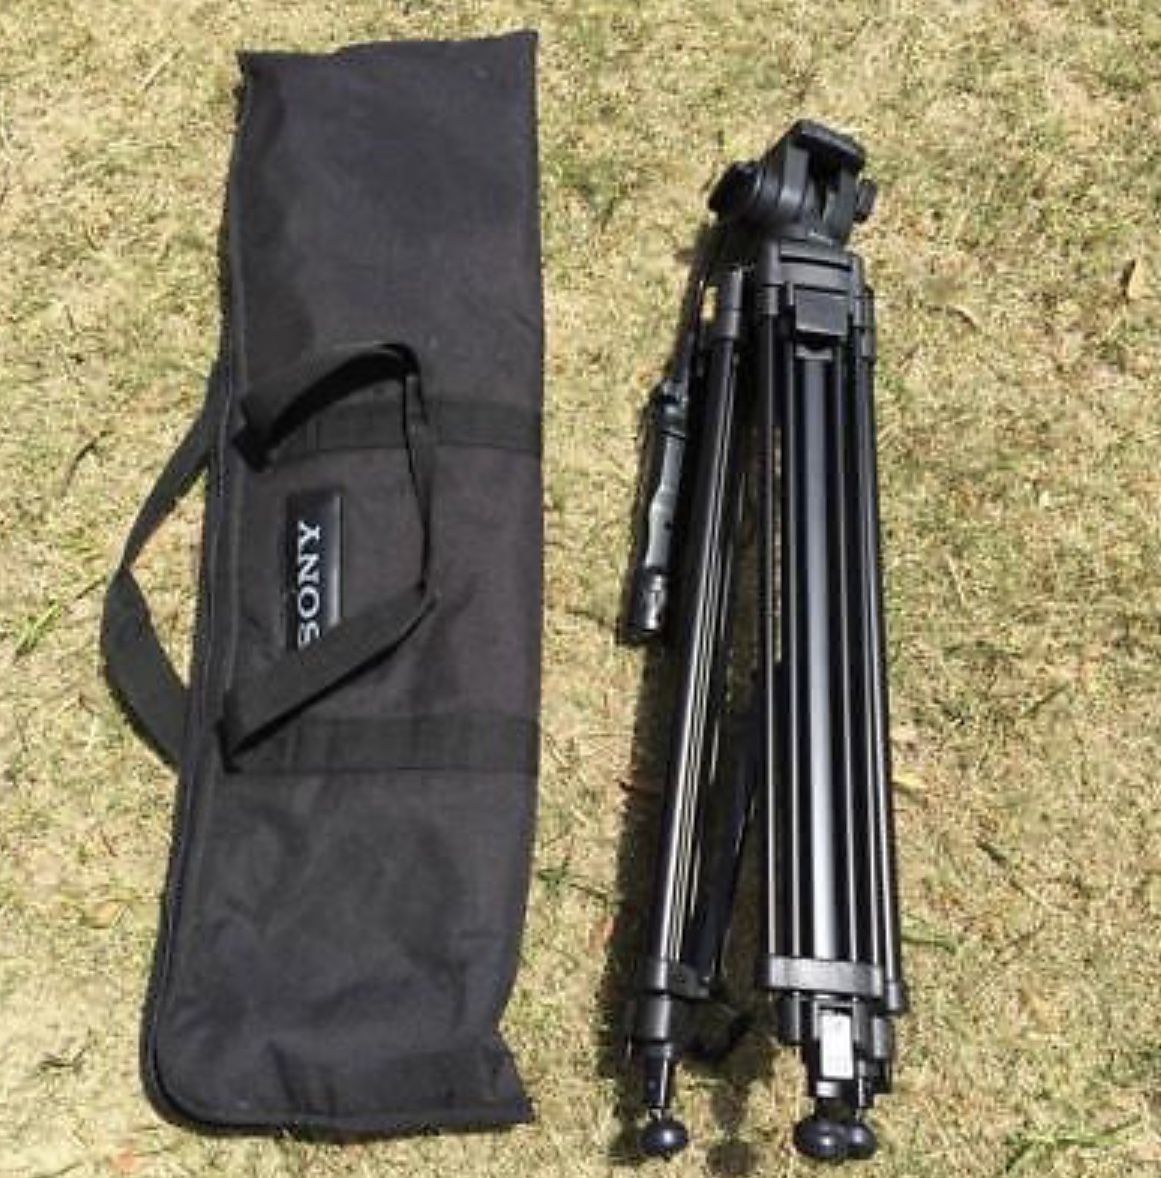 Sony VCT-1170RM Tripod with Two-Way Head and Remote